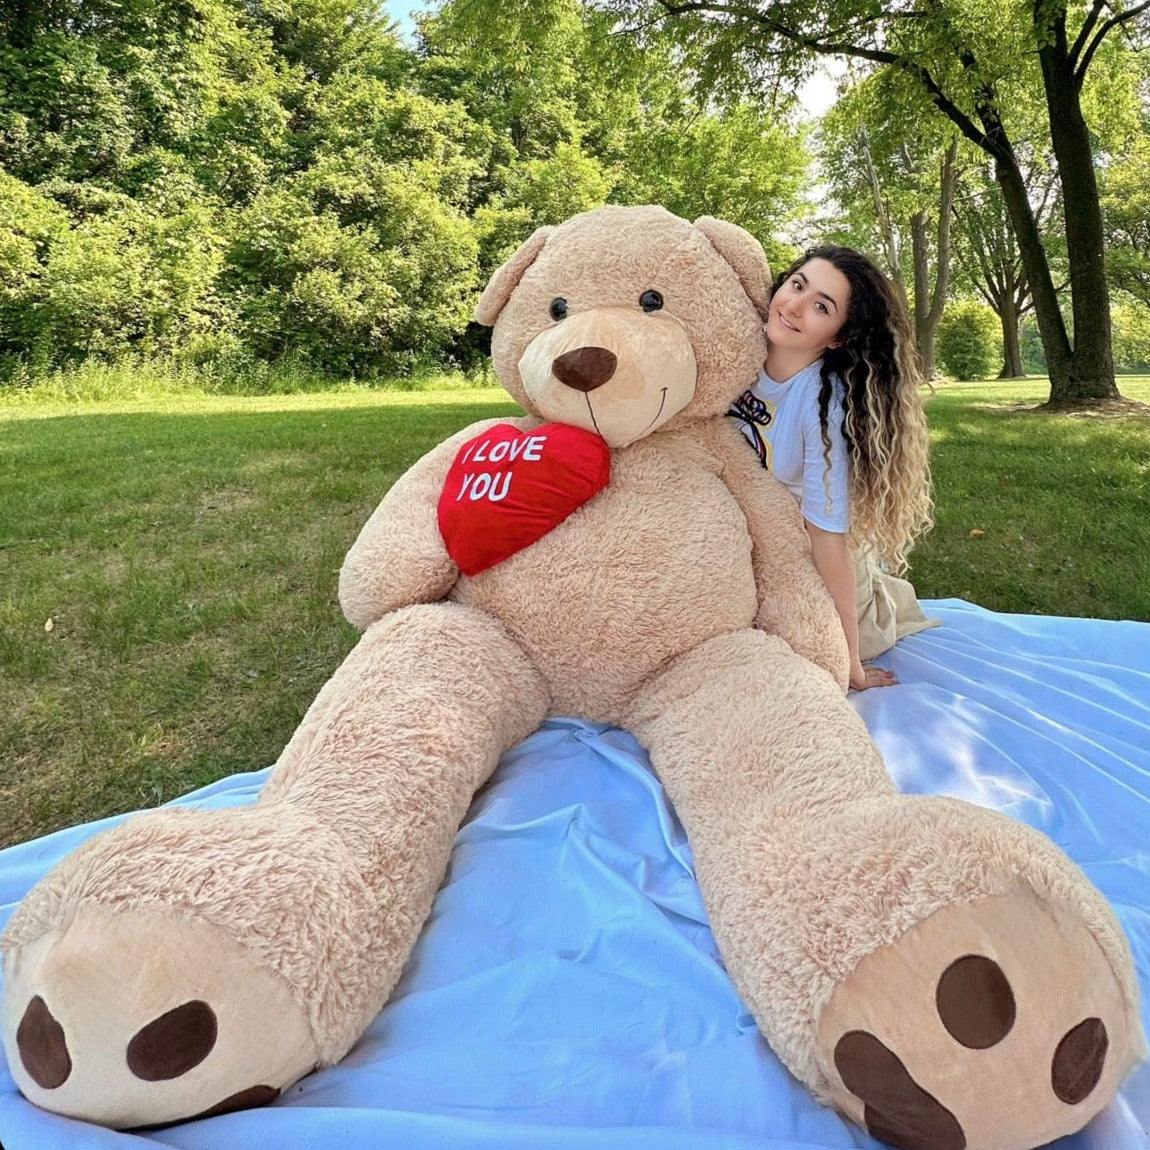 Life Size Teddy Bear Plush Toy, Brown/Beige/Pink, 6 FT